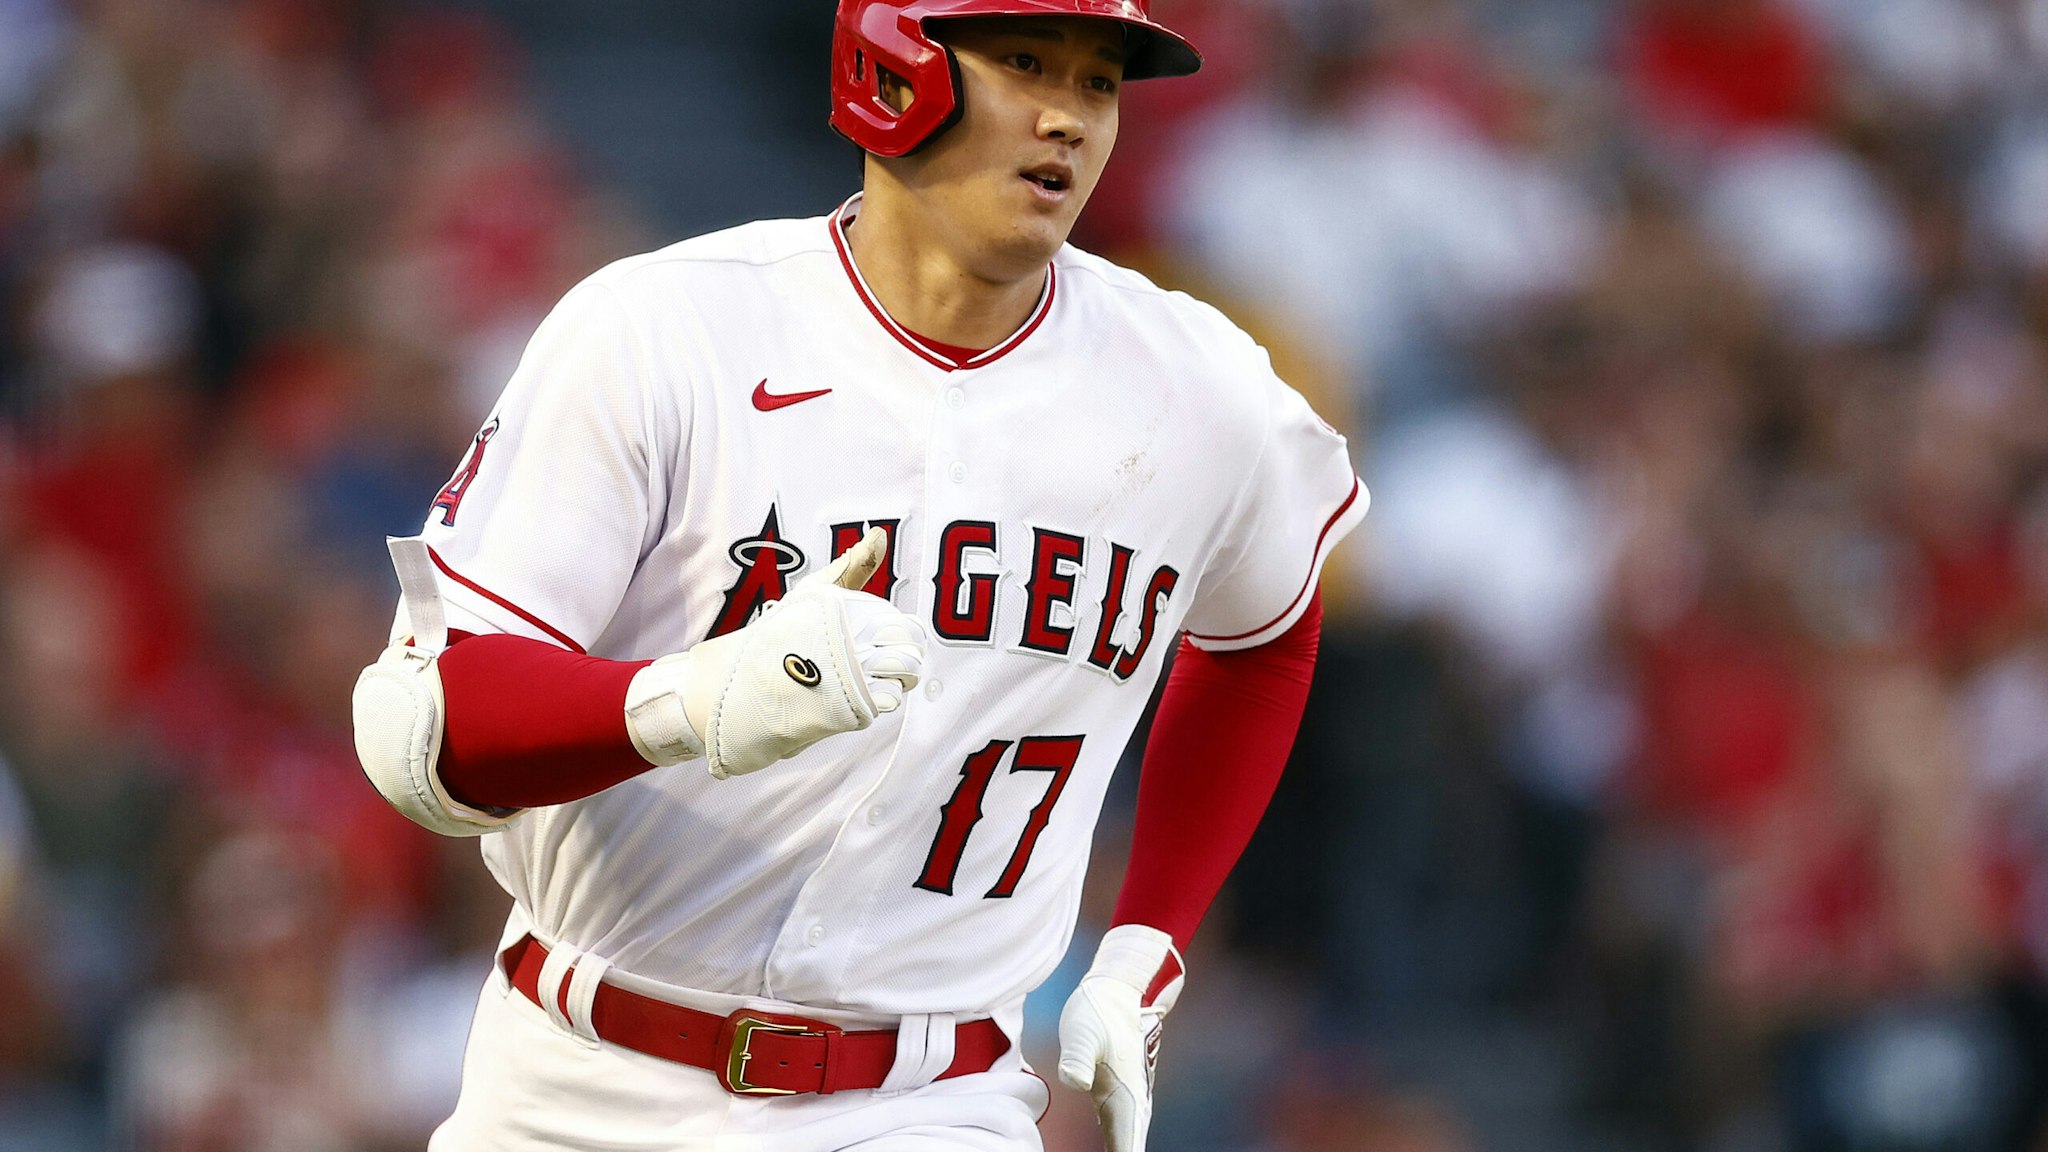 Shohei Ohtani gracefully took part in a benches-clearing brawl Sunday